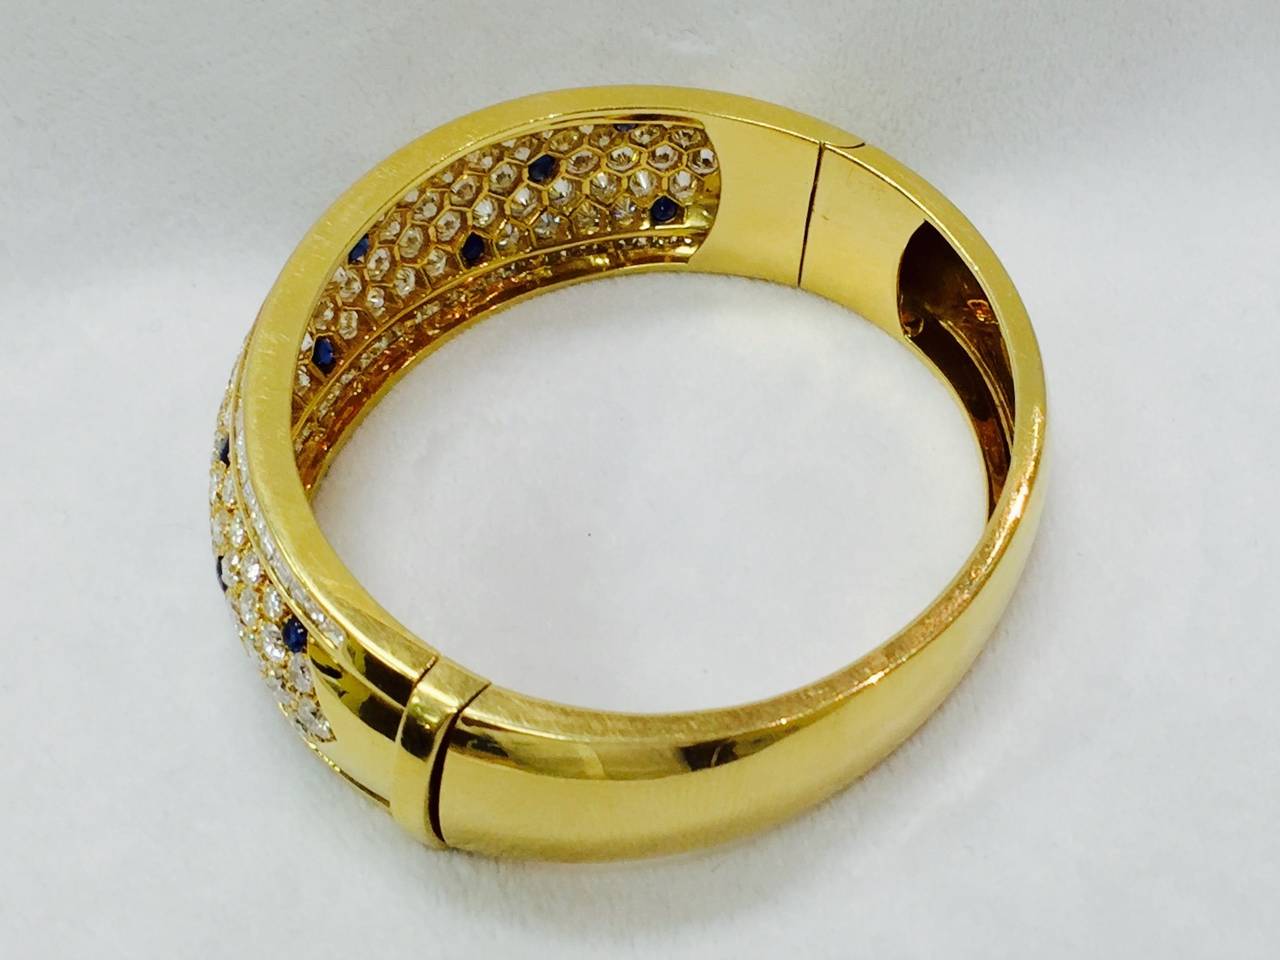 Sapphire Diamond Gold Bangle Bracelet In Excellent Condition For Sale In Palm Beach, FL